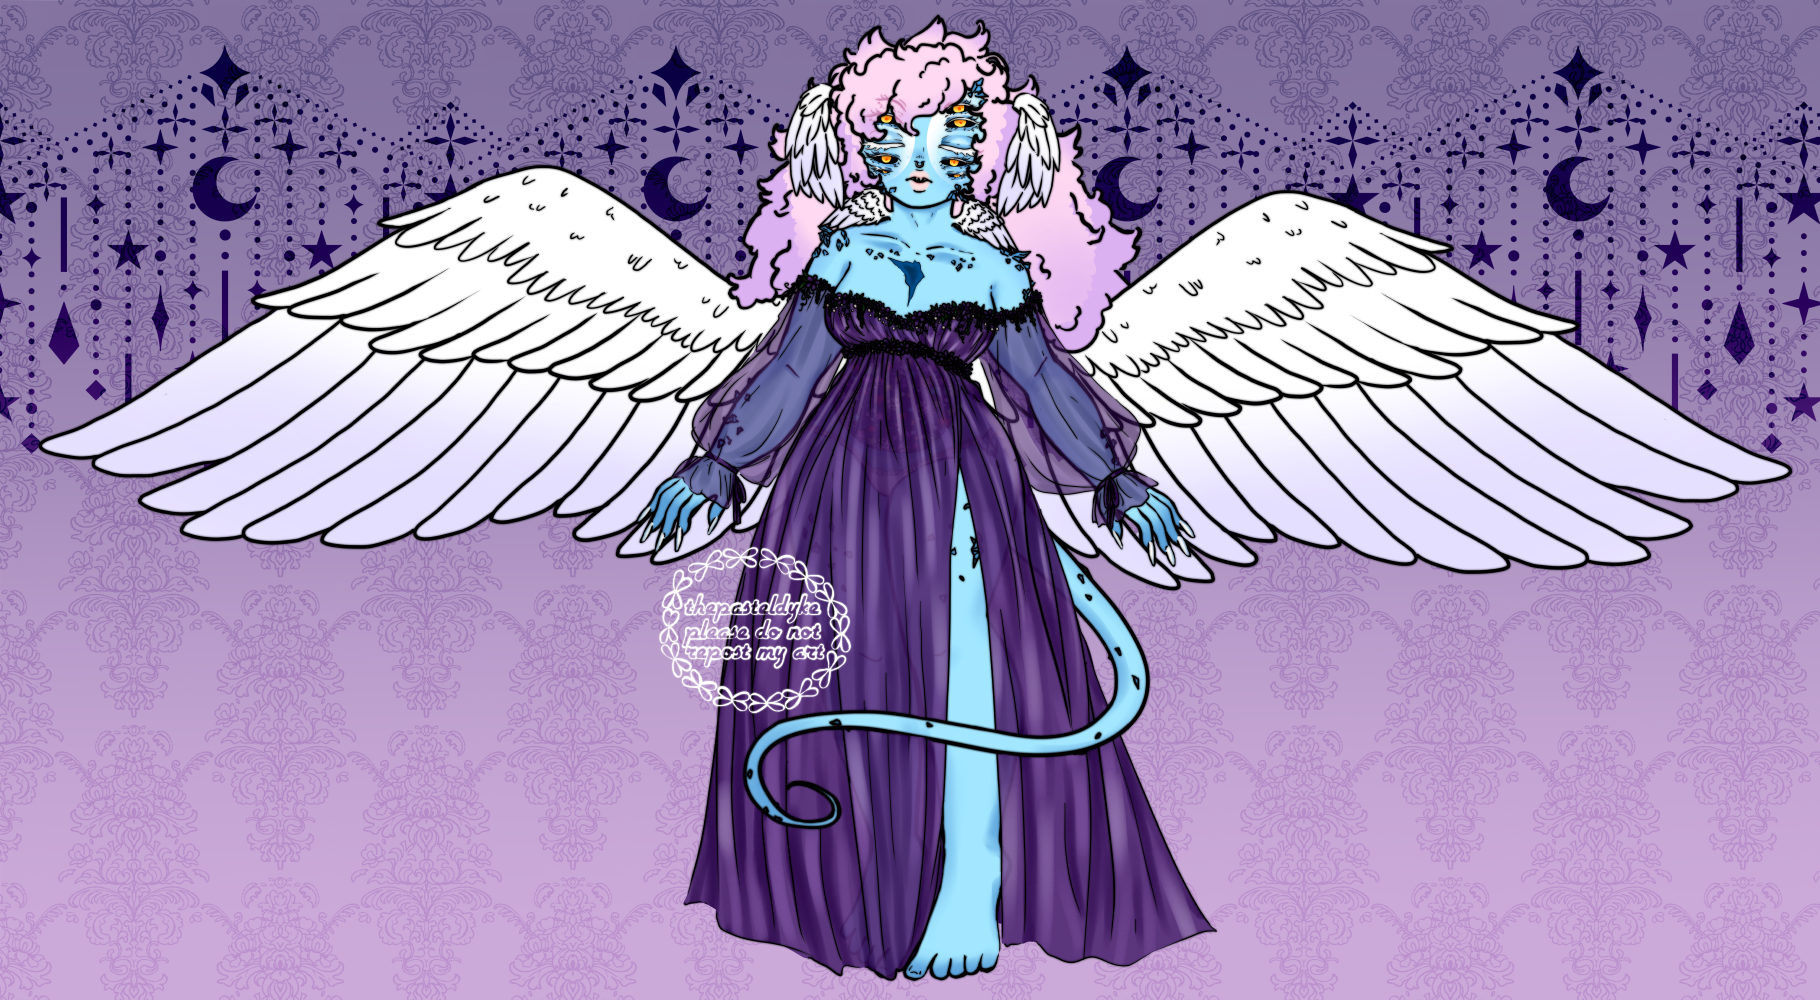 Character name: Yen. Yen has hair that fades from light pink to lilac that is very fluffy, blue skin with blue crystals growing out of several areas on her skin. She has three pairs of white wings, one growing out of her head, one out of her neck and a giant pair growing out of her back. She has a long slender tail and long nails. She has a large scar at the center of her skin. On her face are five sets of eyes. The middle set of eyes are closed while the rest are open, showing black scleras and yellow irises. In her stomach is a dome that is a dark sky filled with colouful stars and sparkles. She's wearing a sheer purple dress with a slit all the way up her side, and poofy sleeves.